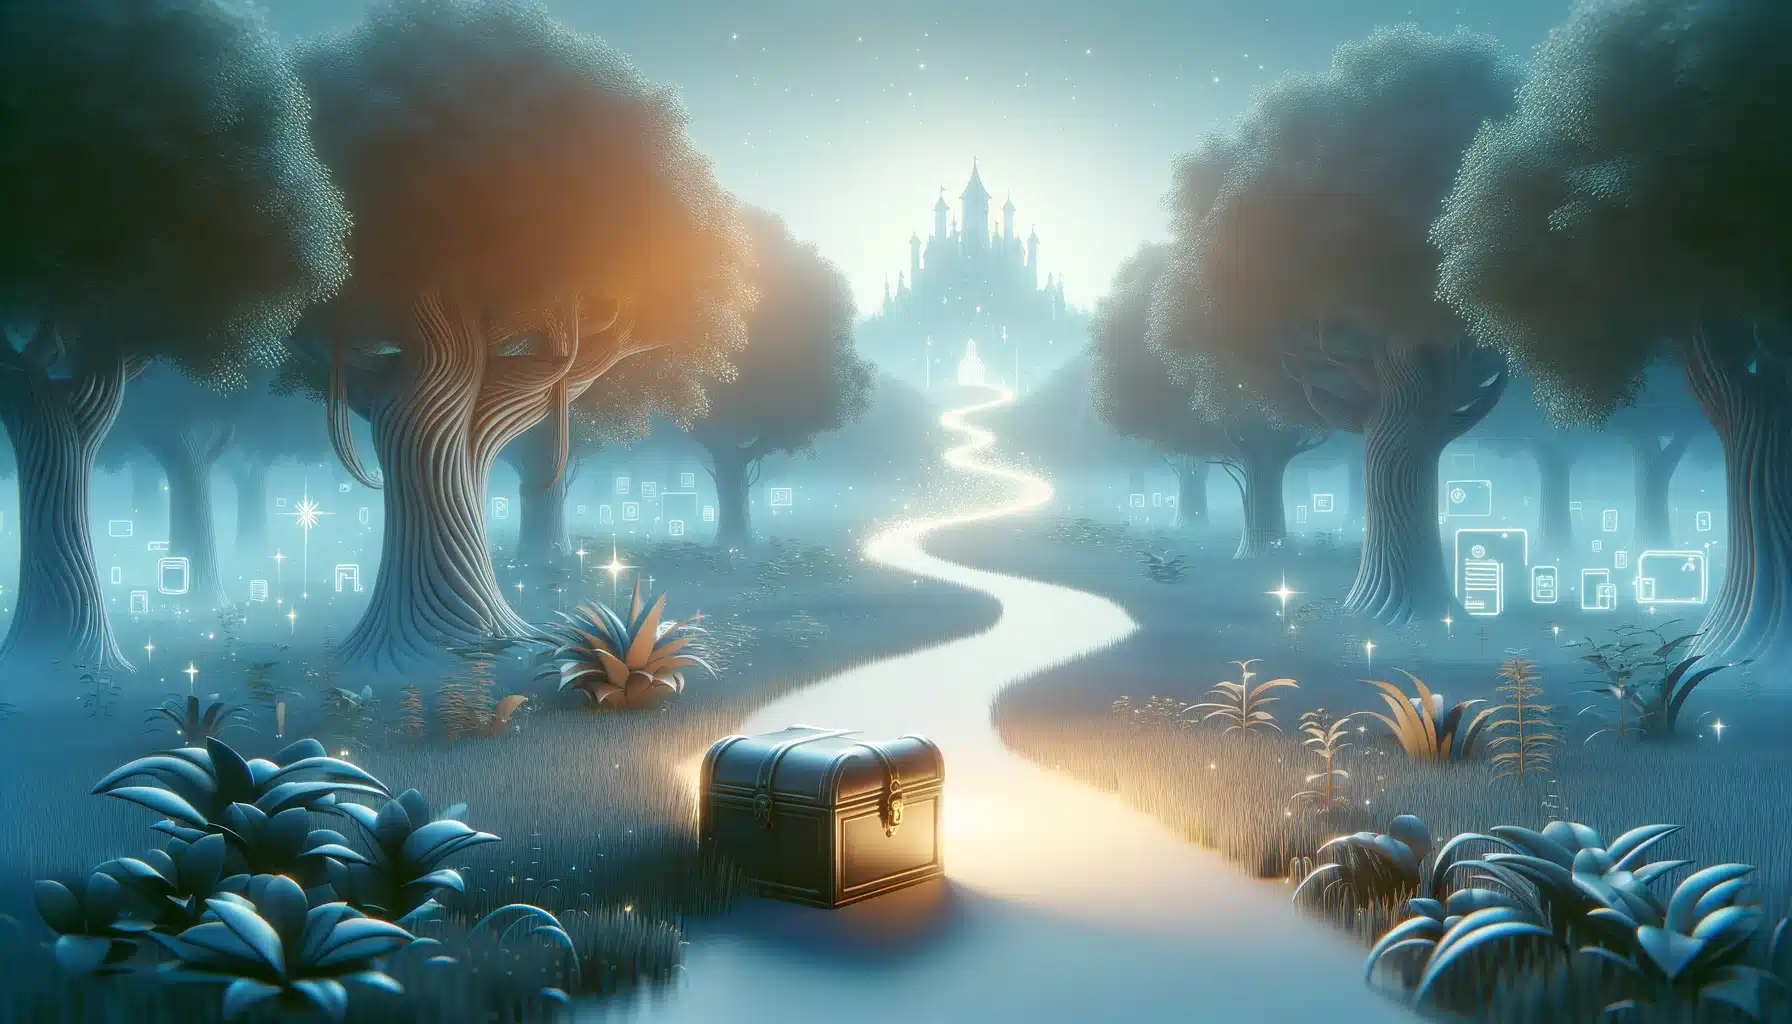 Whimsical scene of a path with a treasure chest